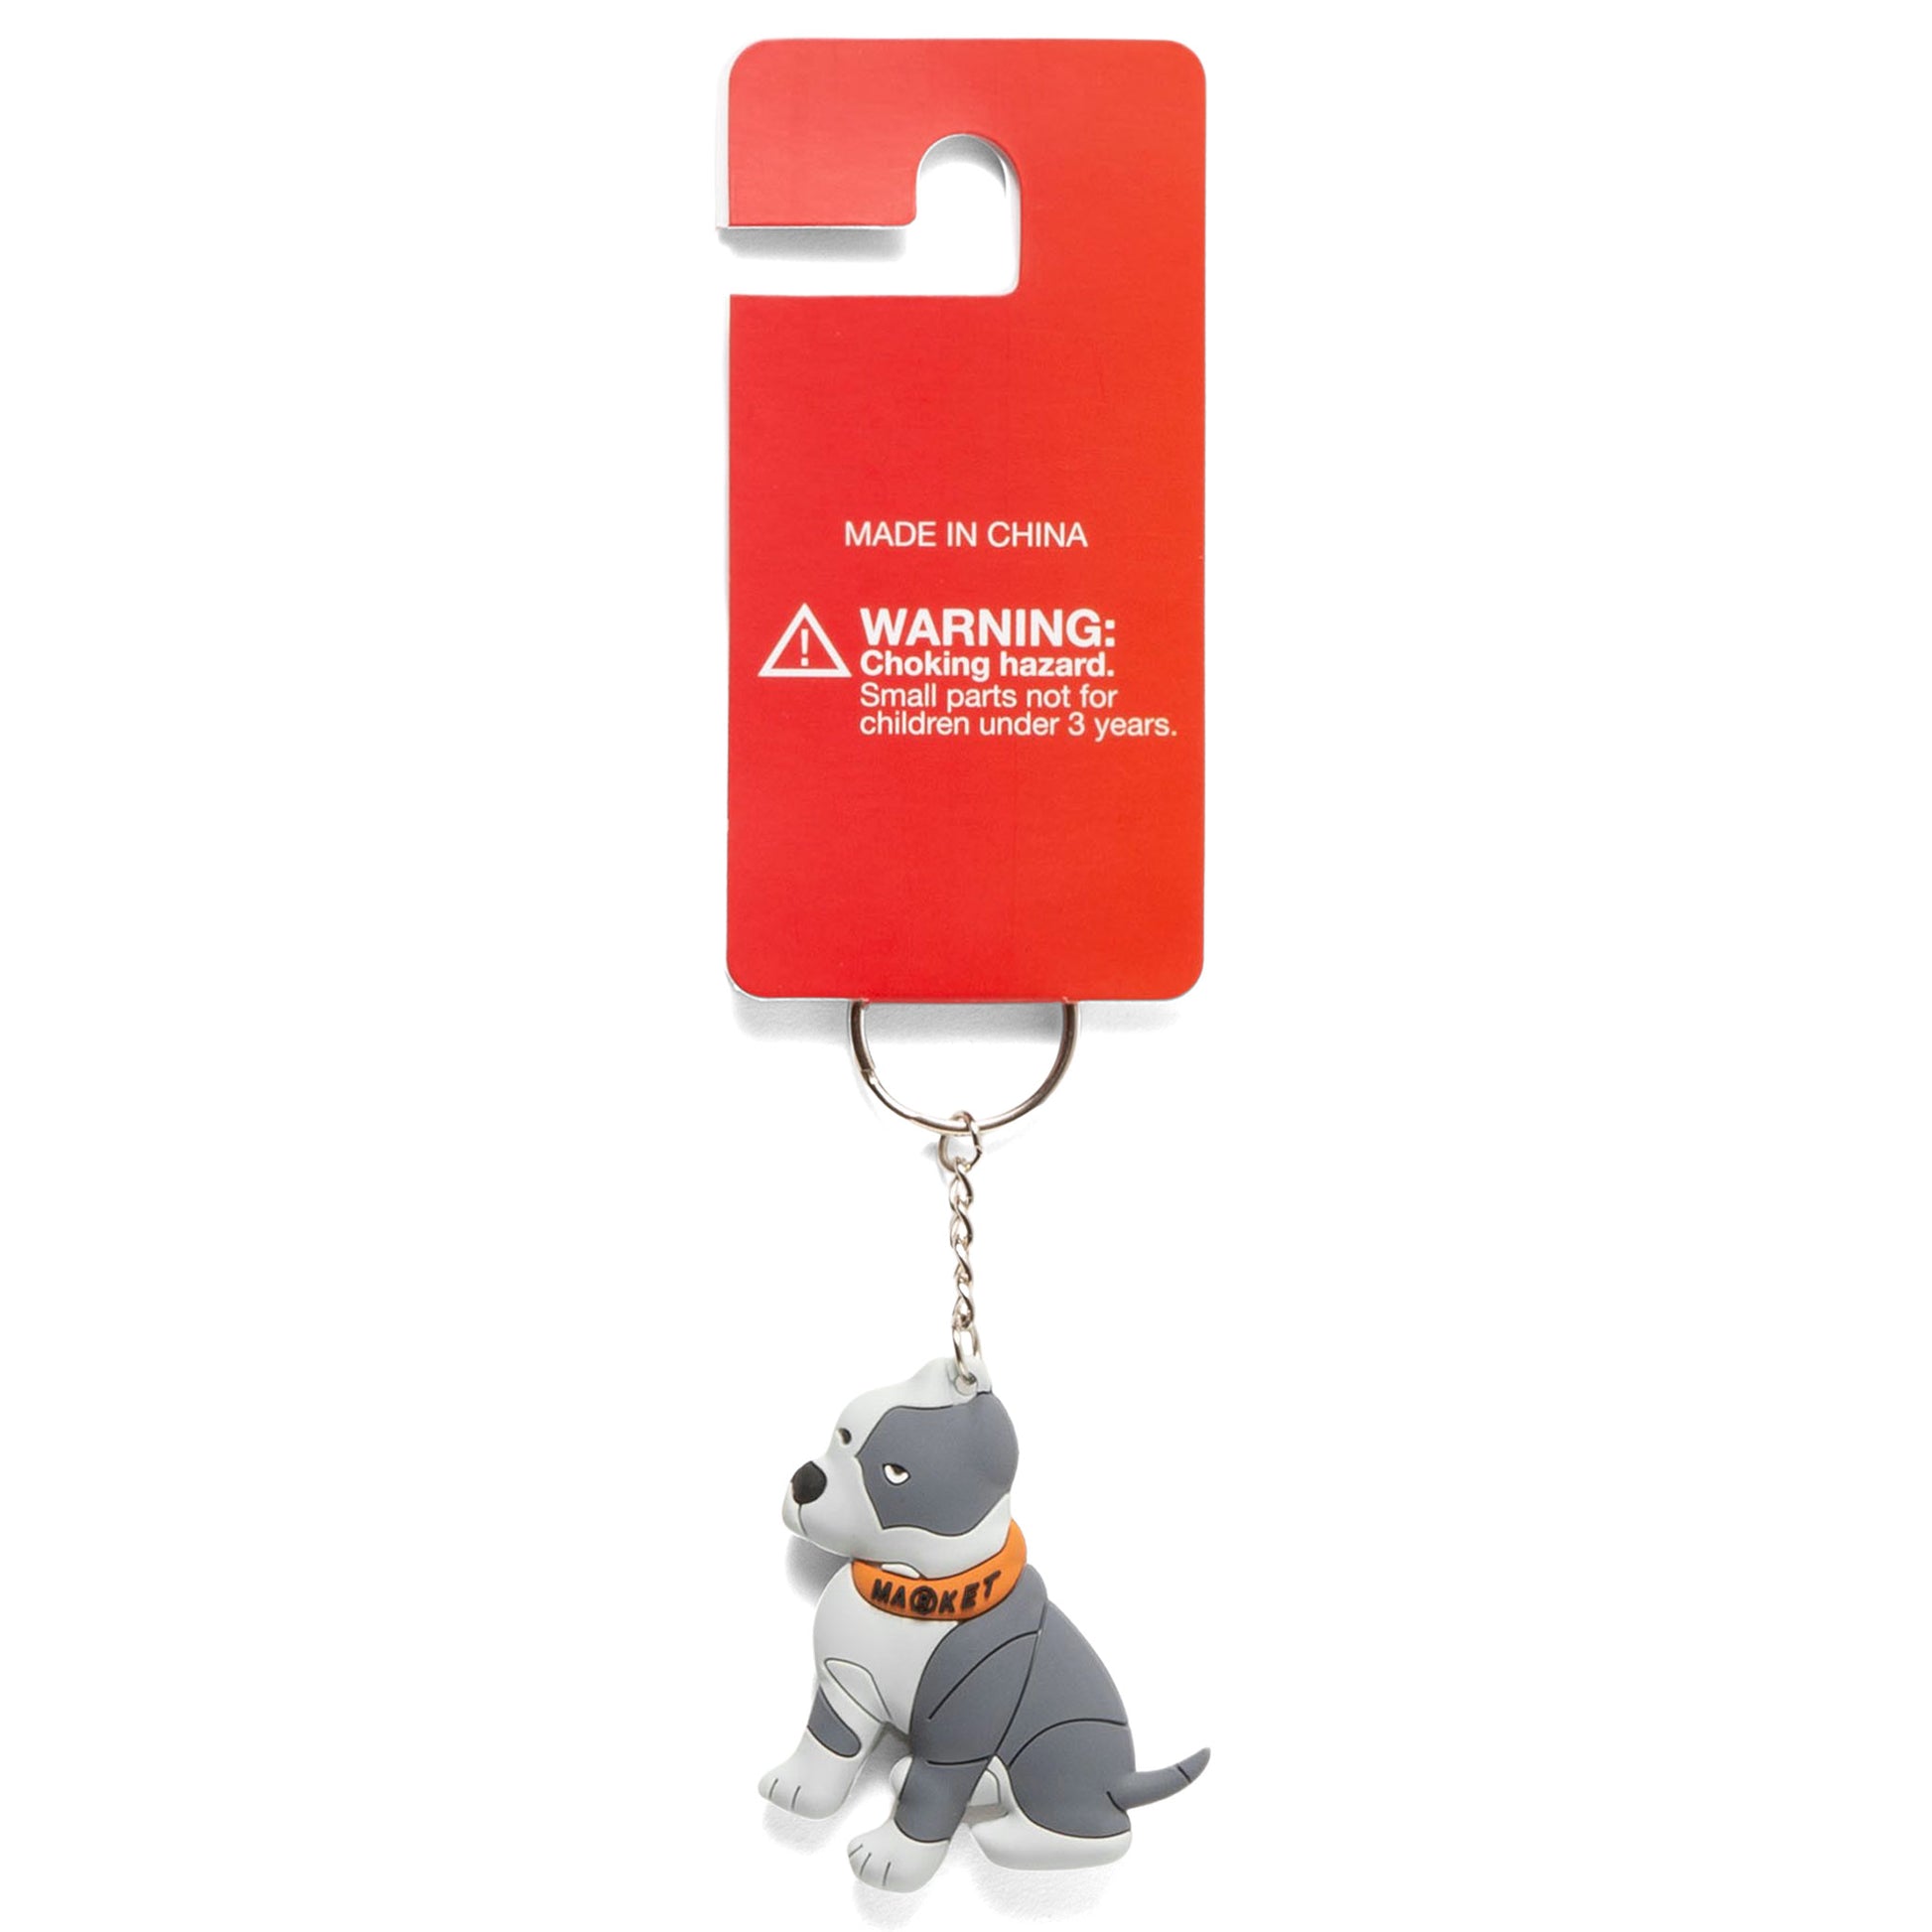 MARKET clothing brand BEWARE DOG KEYCHAIN. Find more graphic tees, socks, hats and small goods at MarketStudios.com. Formally Chinatown Market. 